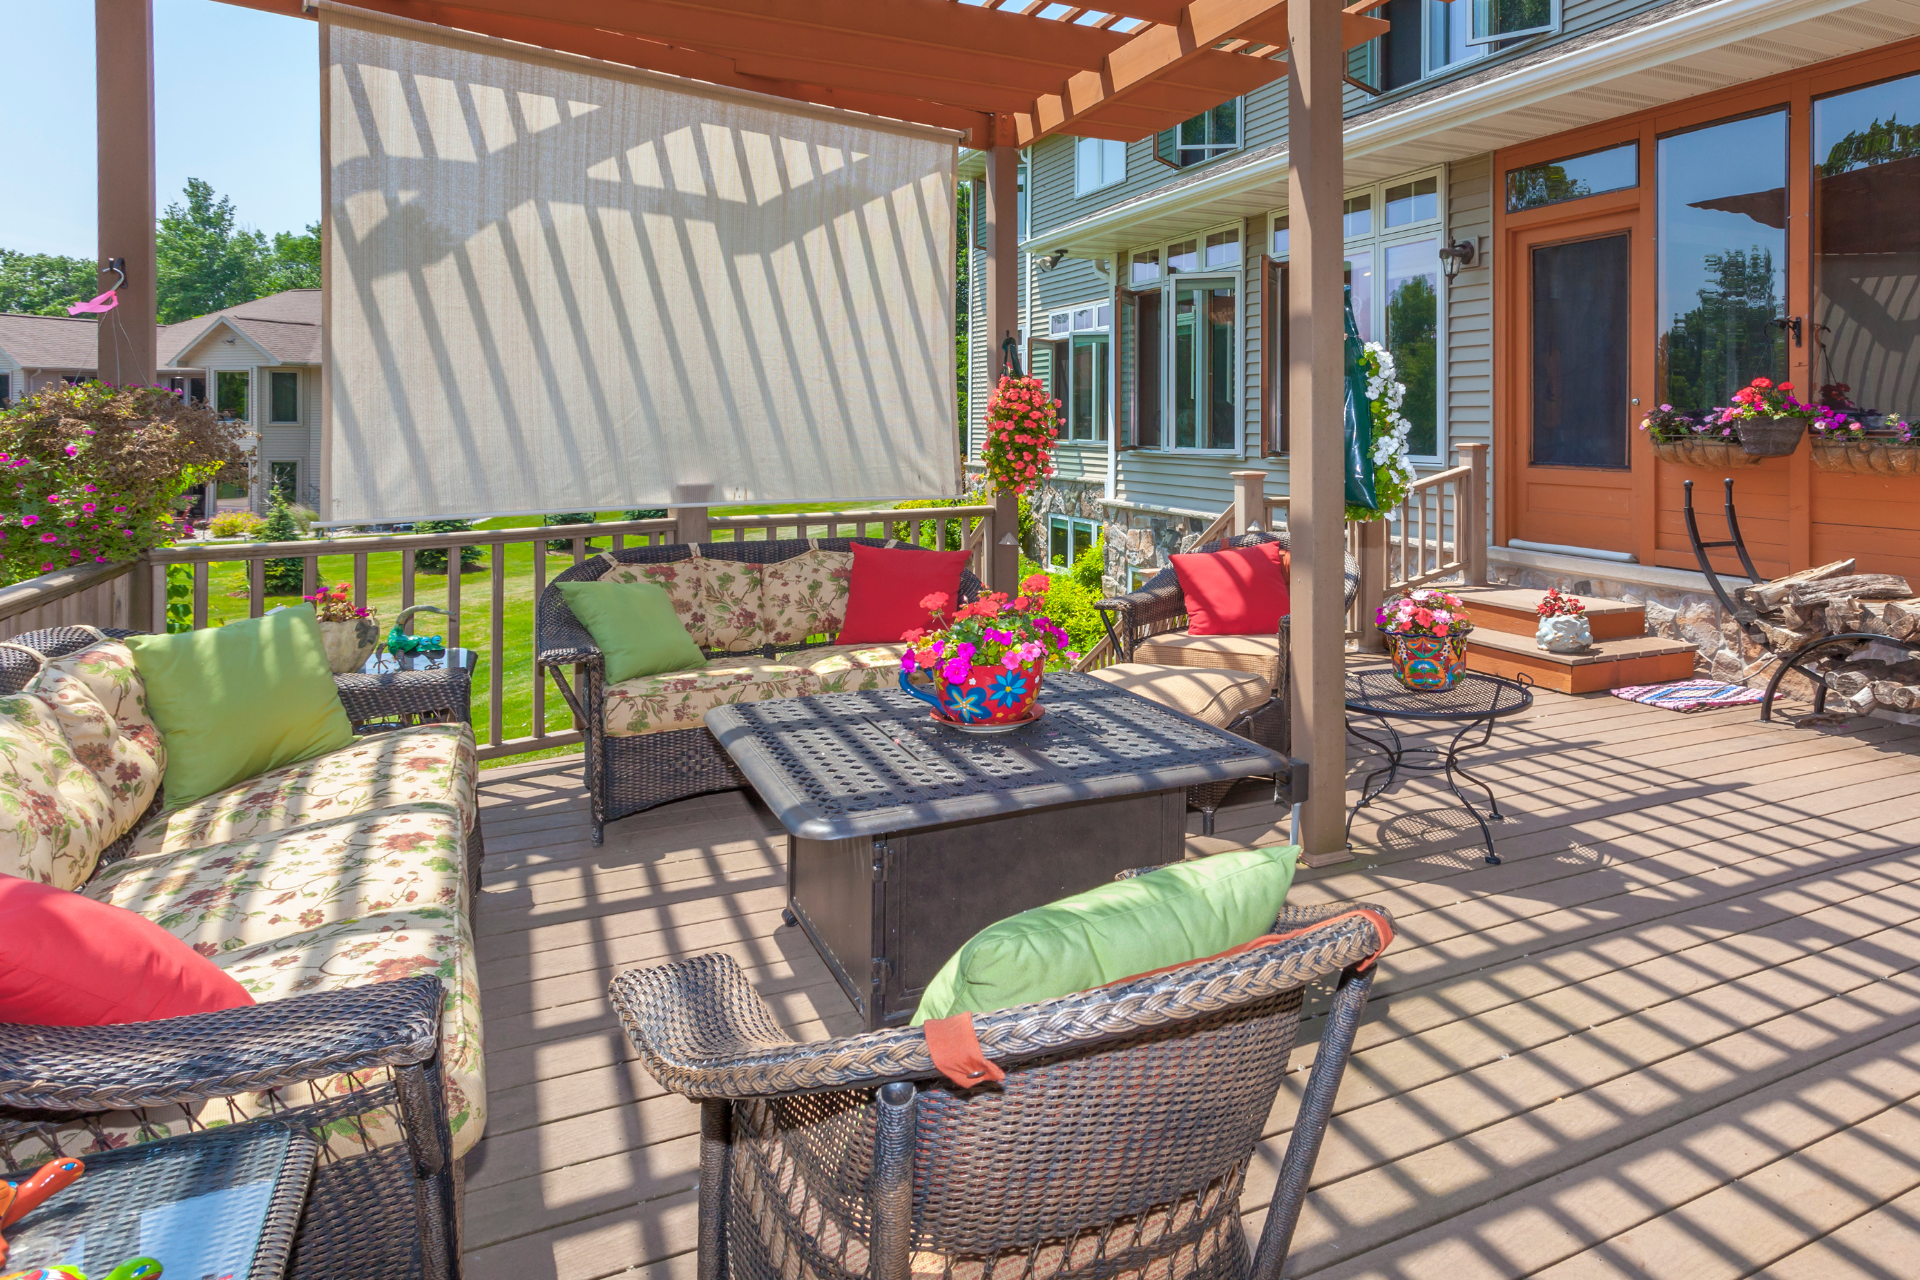 A photo of a deck in the backyard of a house. The deck has tons of furniture on it. The deck also has a screen in the back to help block the sun. It is a beautiful and sunny day. The deck has lots of flowers and pots hanging from the pergola as well as seated on the deck.